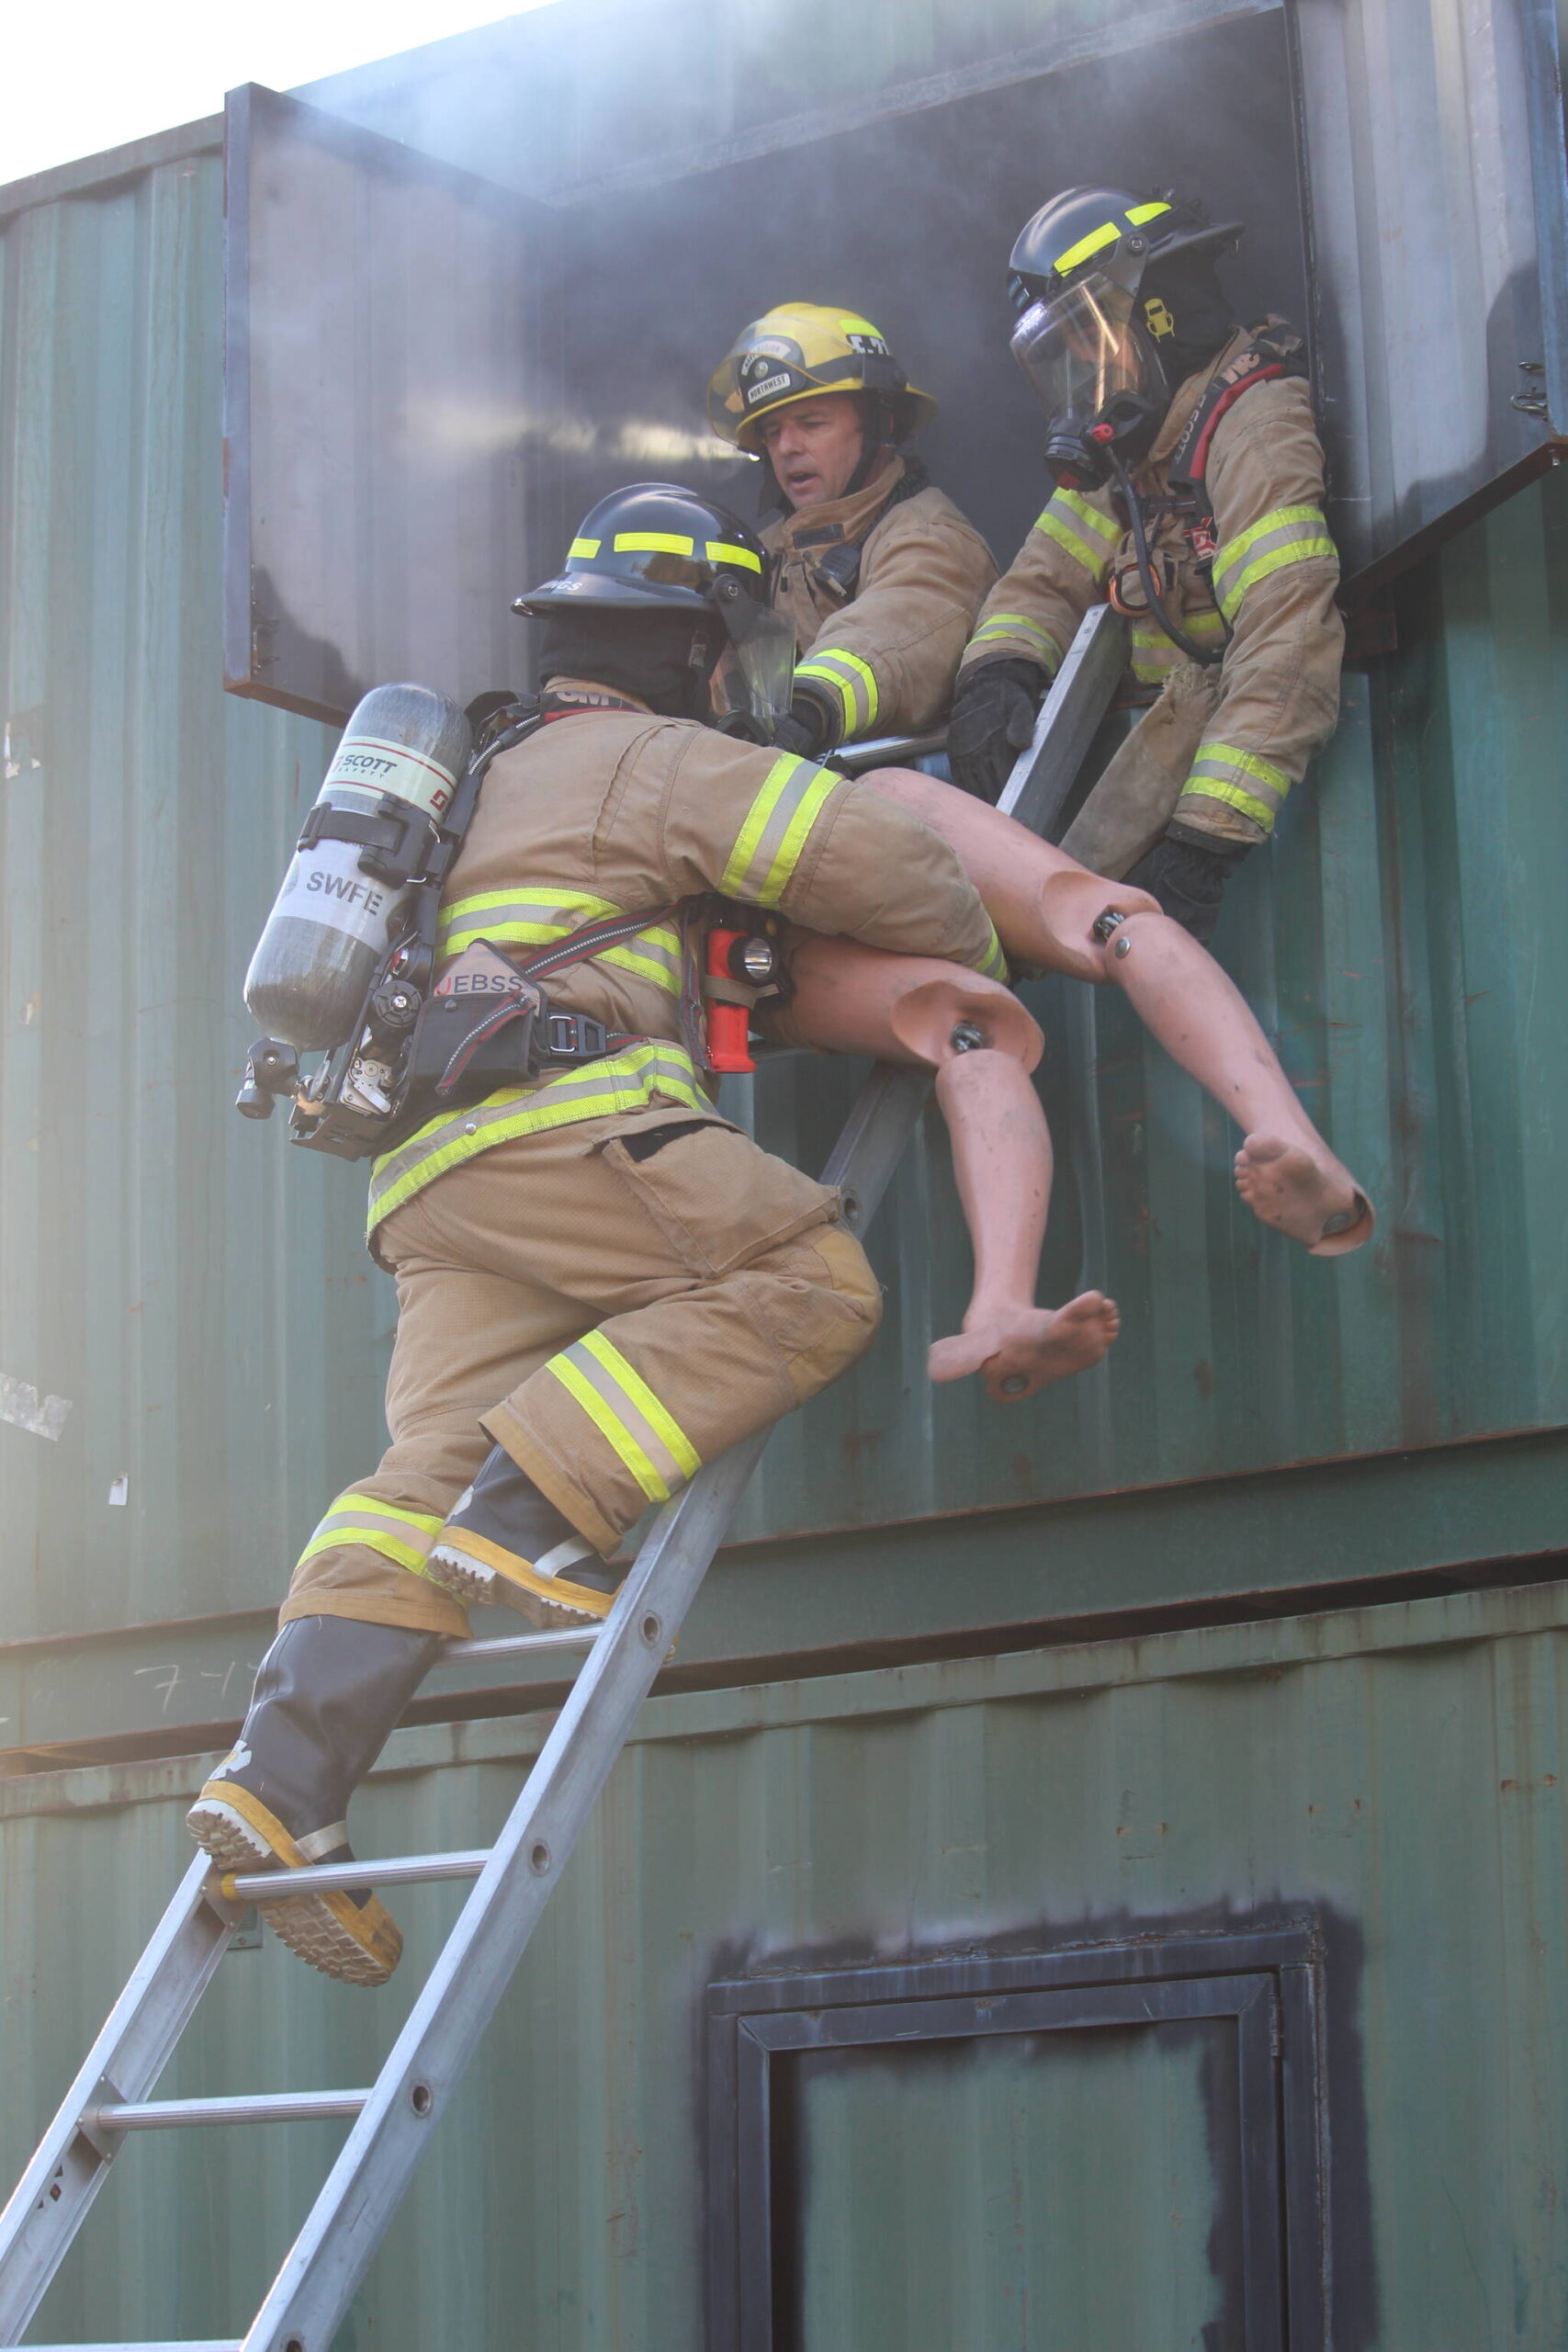 Fire Academy recruits train in Oak Harbor on Wednesday, April 12. (Photo by Karina Andrew/Whidbey News-Times)